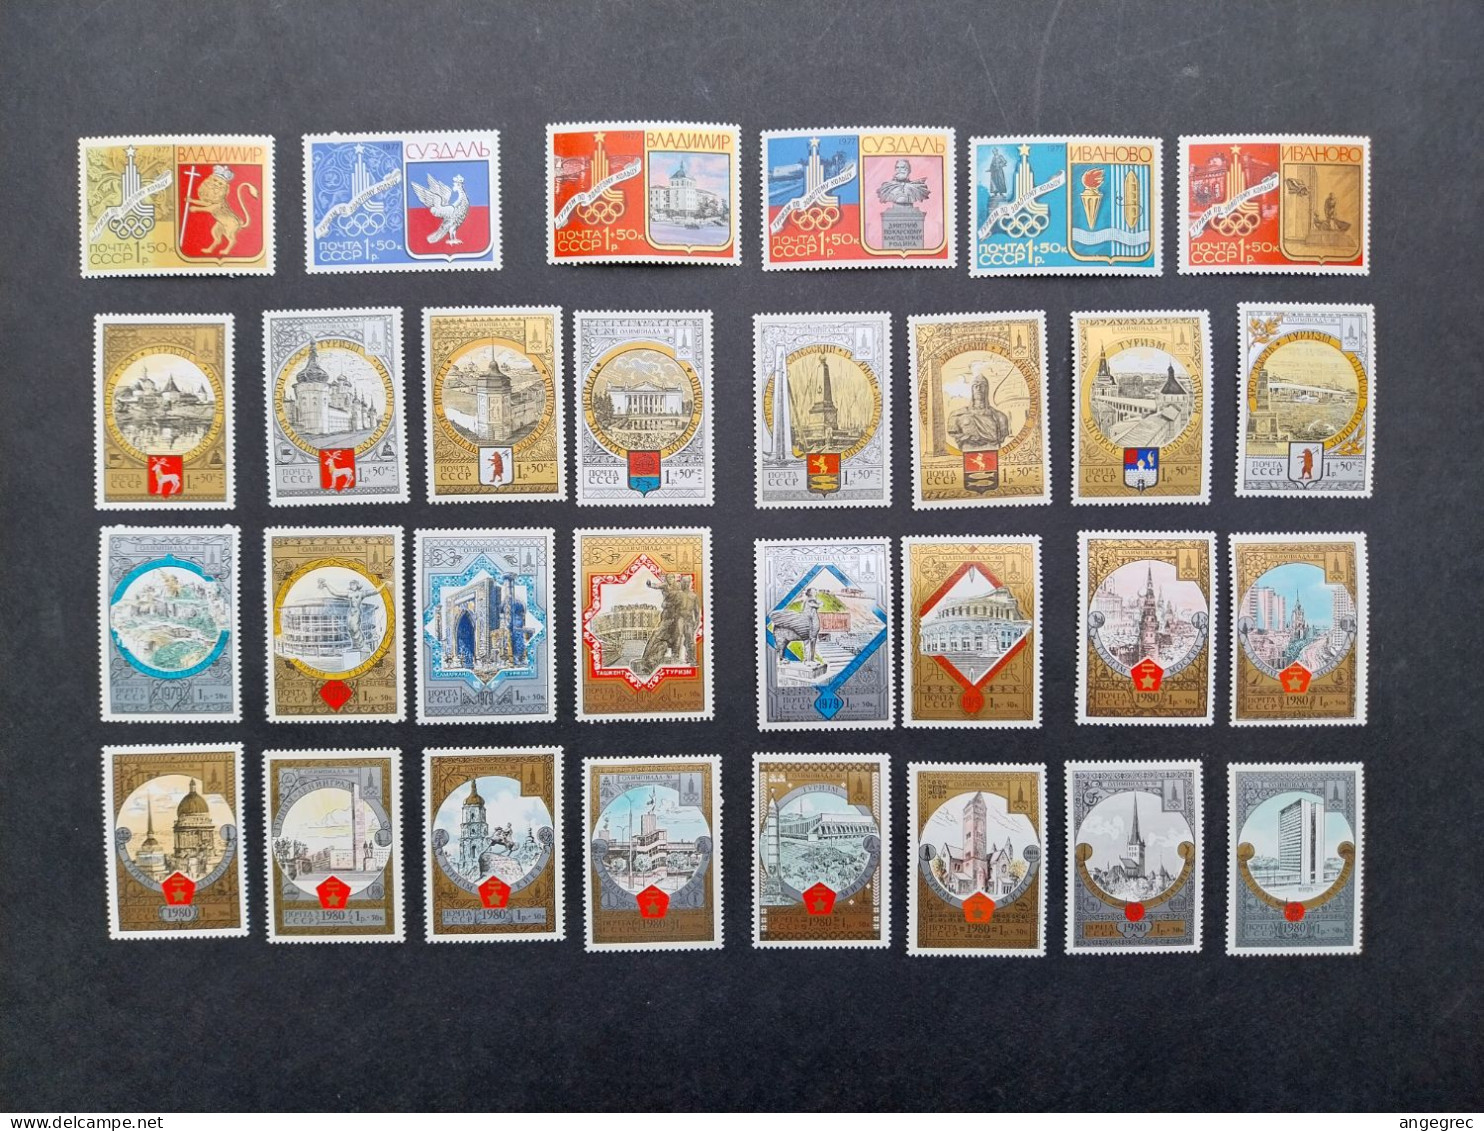 Russie Timbre Lot De 30 Ceinture D'or - Golden Rings Complet Set 30 Stamps Olympiade 80 Jeux Olympiques Neuf ** - Nuevos